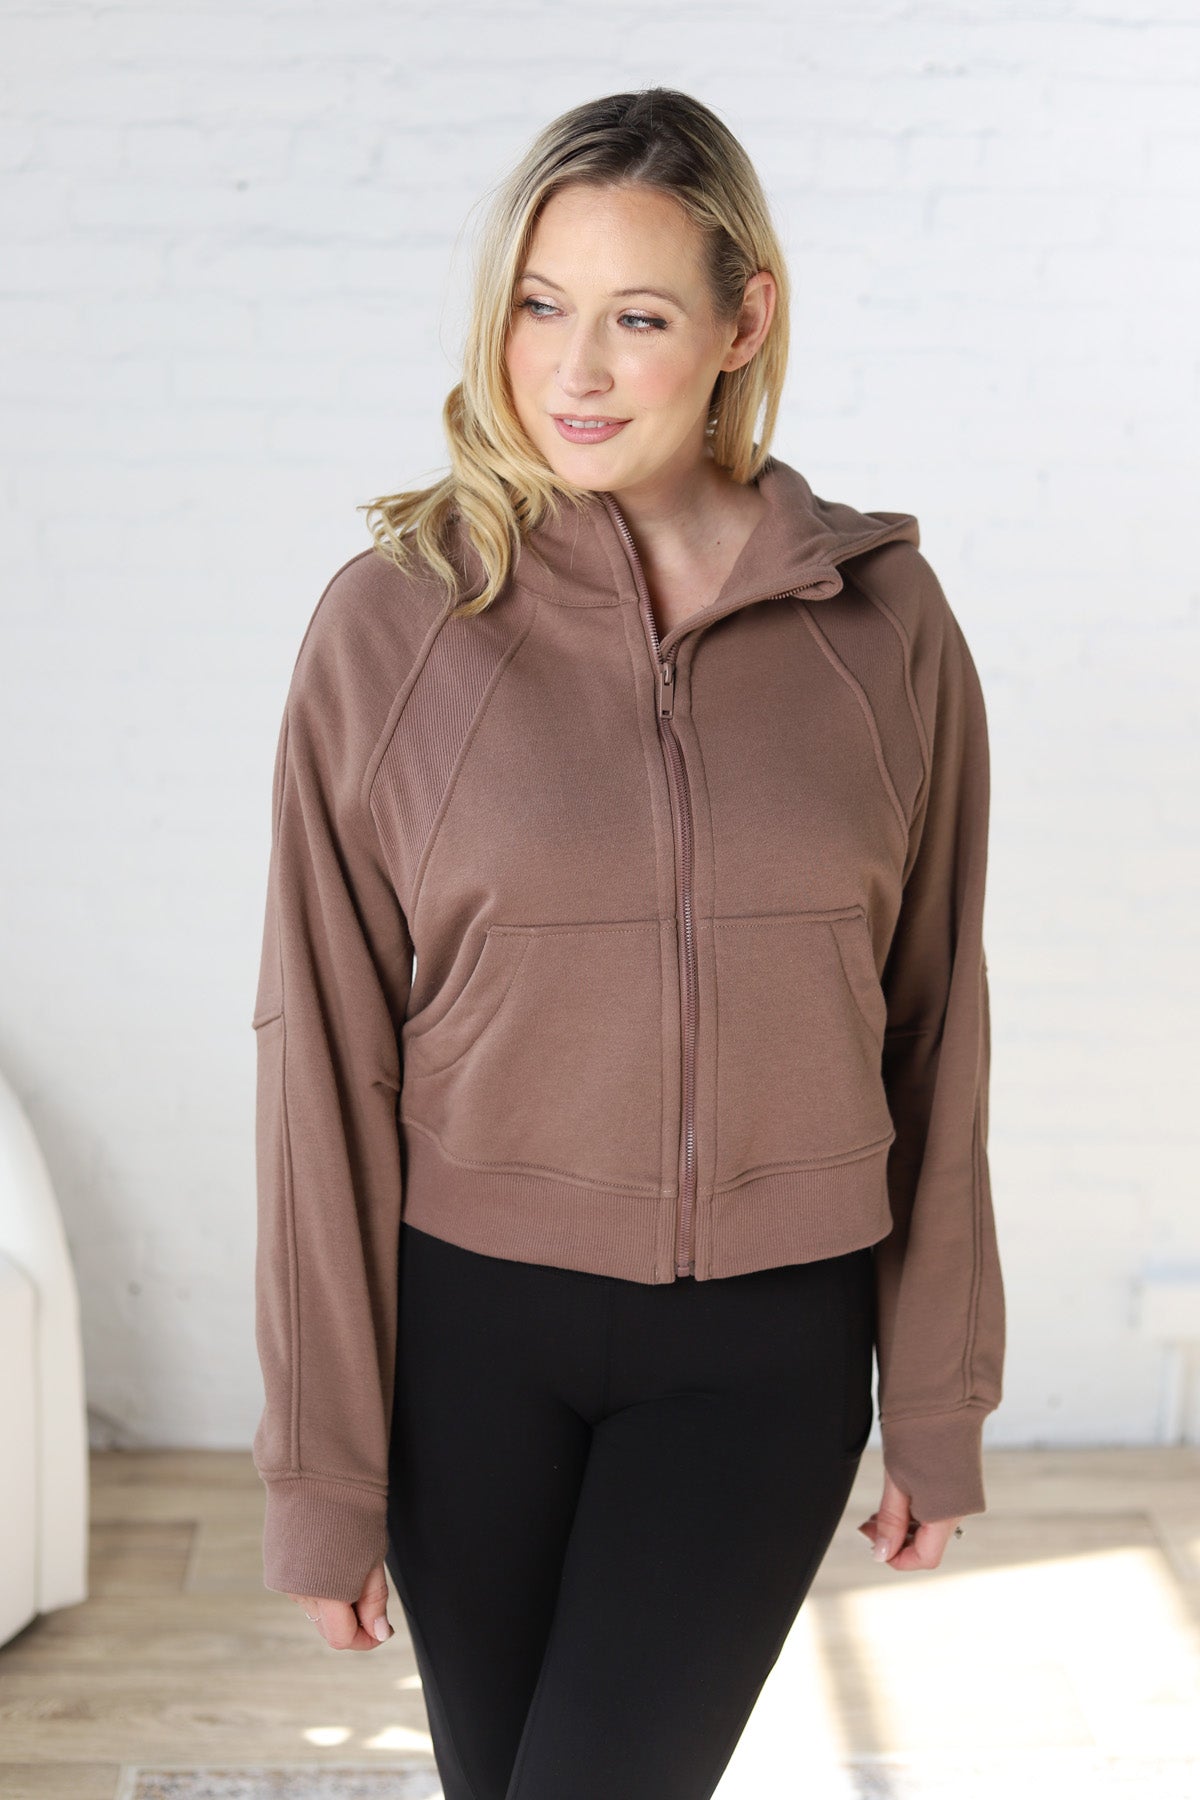 Cortni French Terry Zip Up Jacket - Smoky Brown